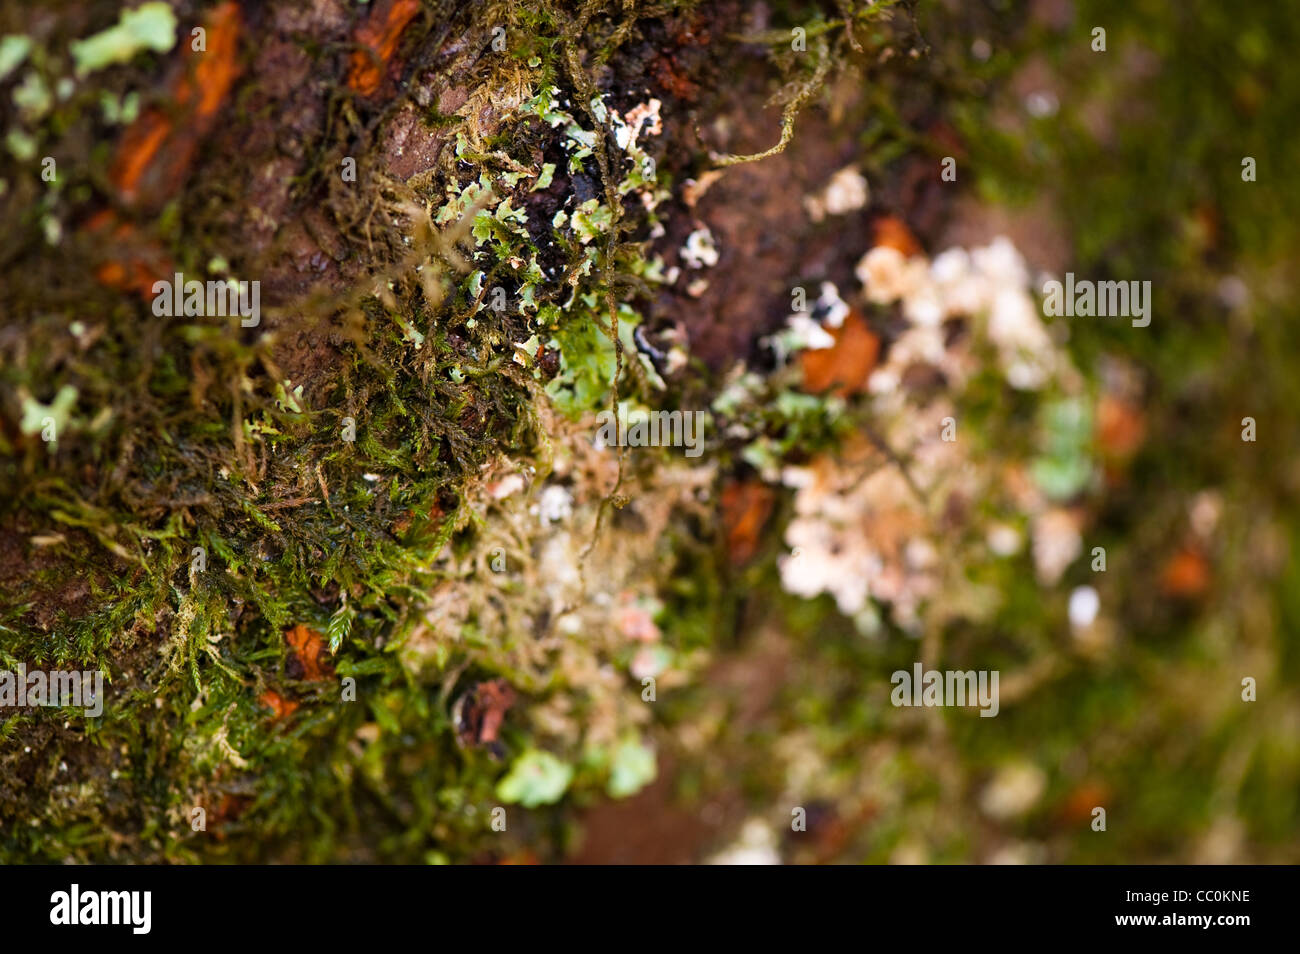 Lichen and moss growing on the trunk of a Prunus Sargentii, Sargent's Cherry tree Stock Photo